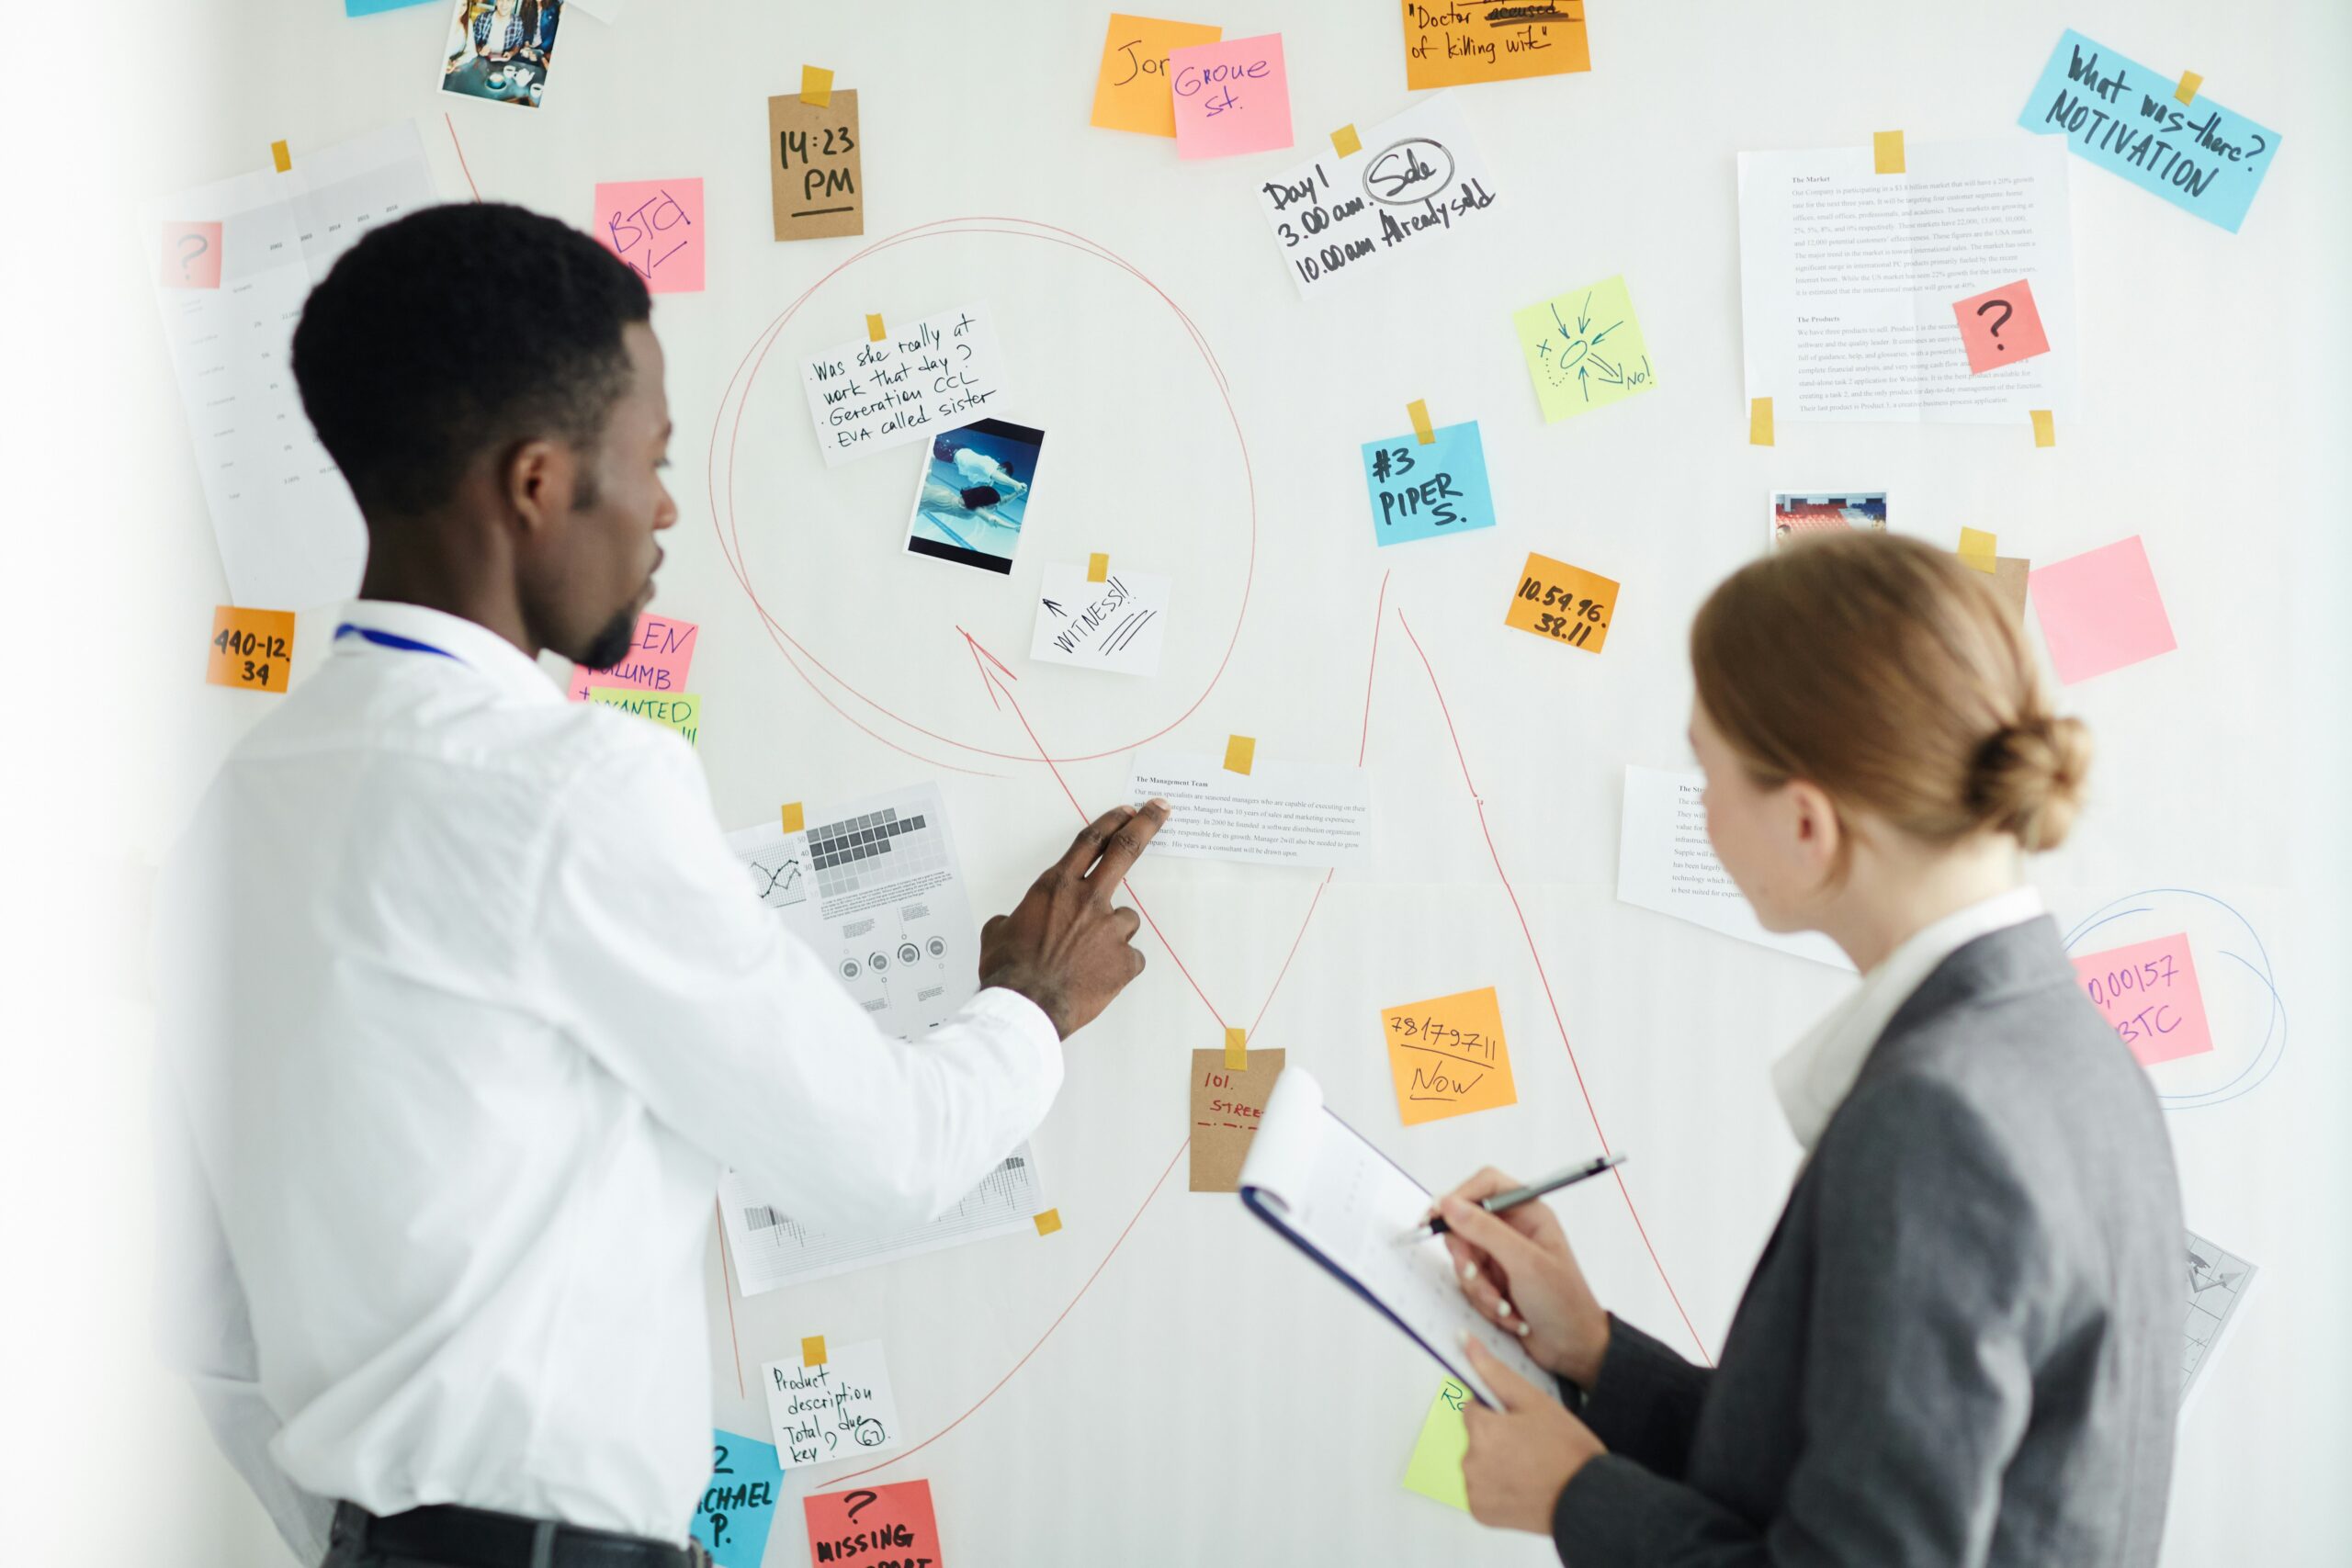 Two people in business attire collaborate in front of a wall covered with colorful sticky notes, papers, and diagrams as they engage in business process automation consulting.